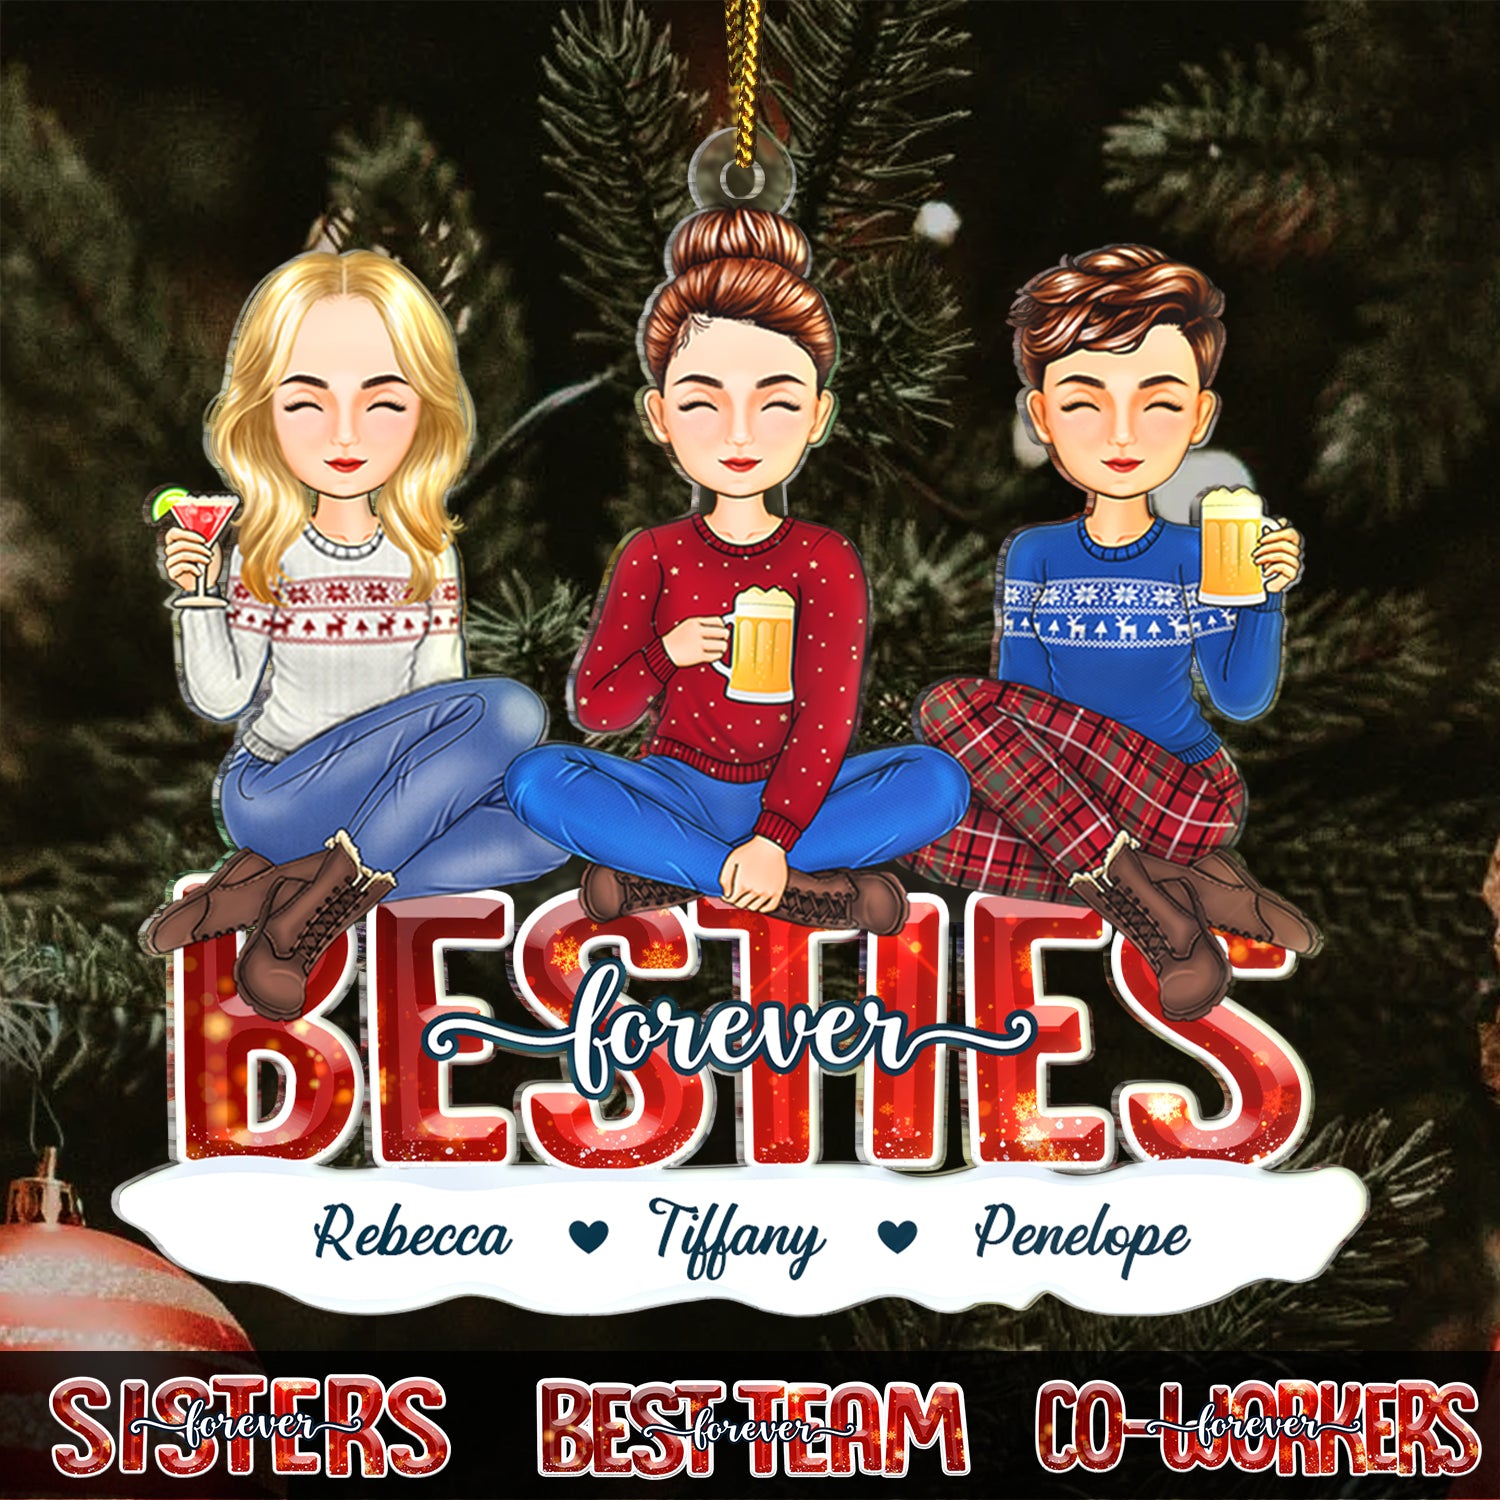 Sisters Besties Forever - Christmas Gift For Siblings, Best Friends And Colleagues - Personalized Cutout Acrylic Ornament